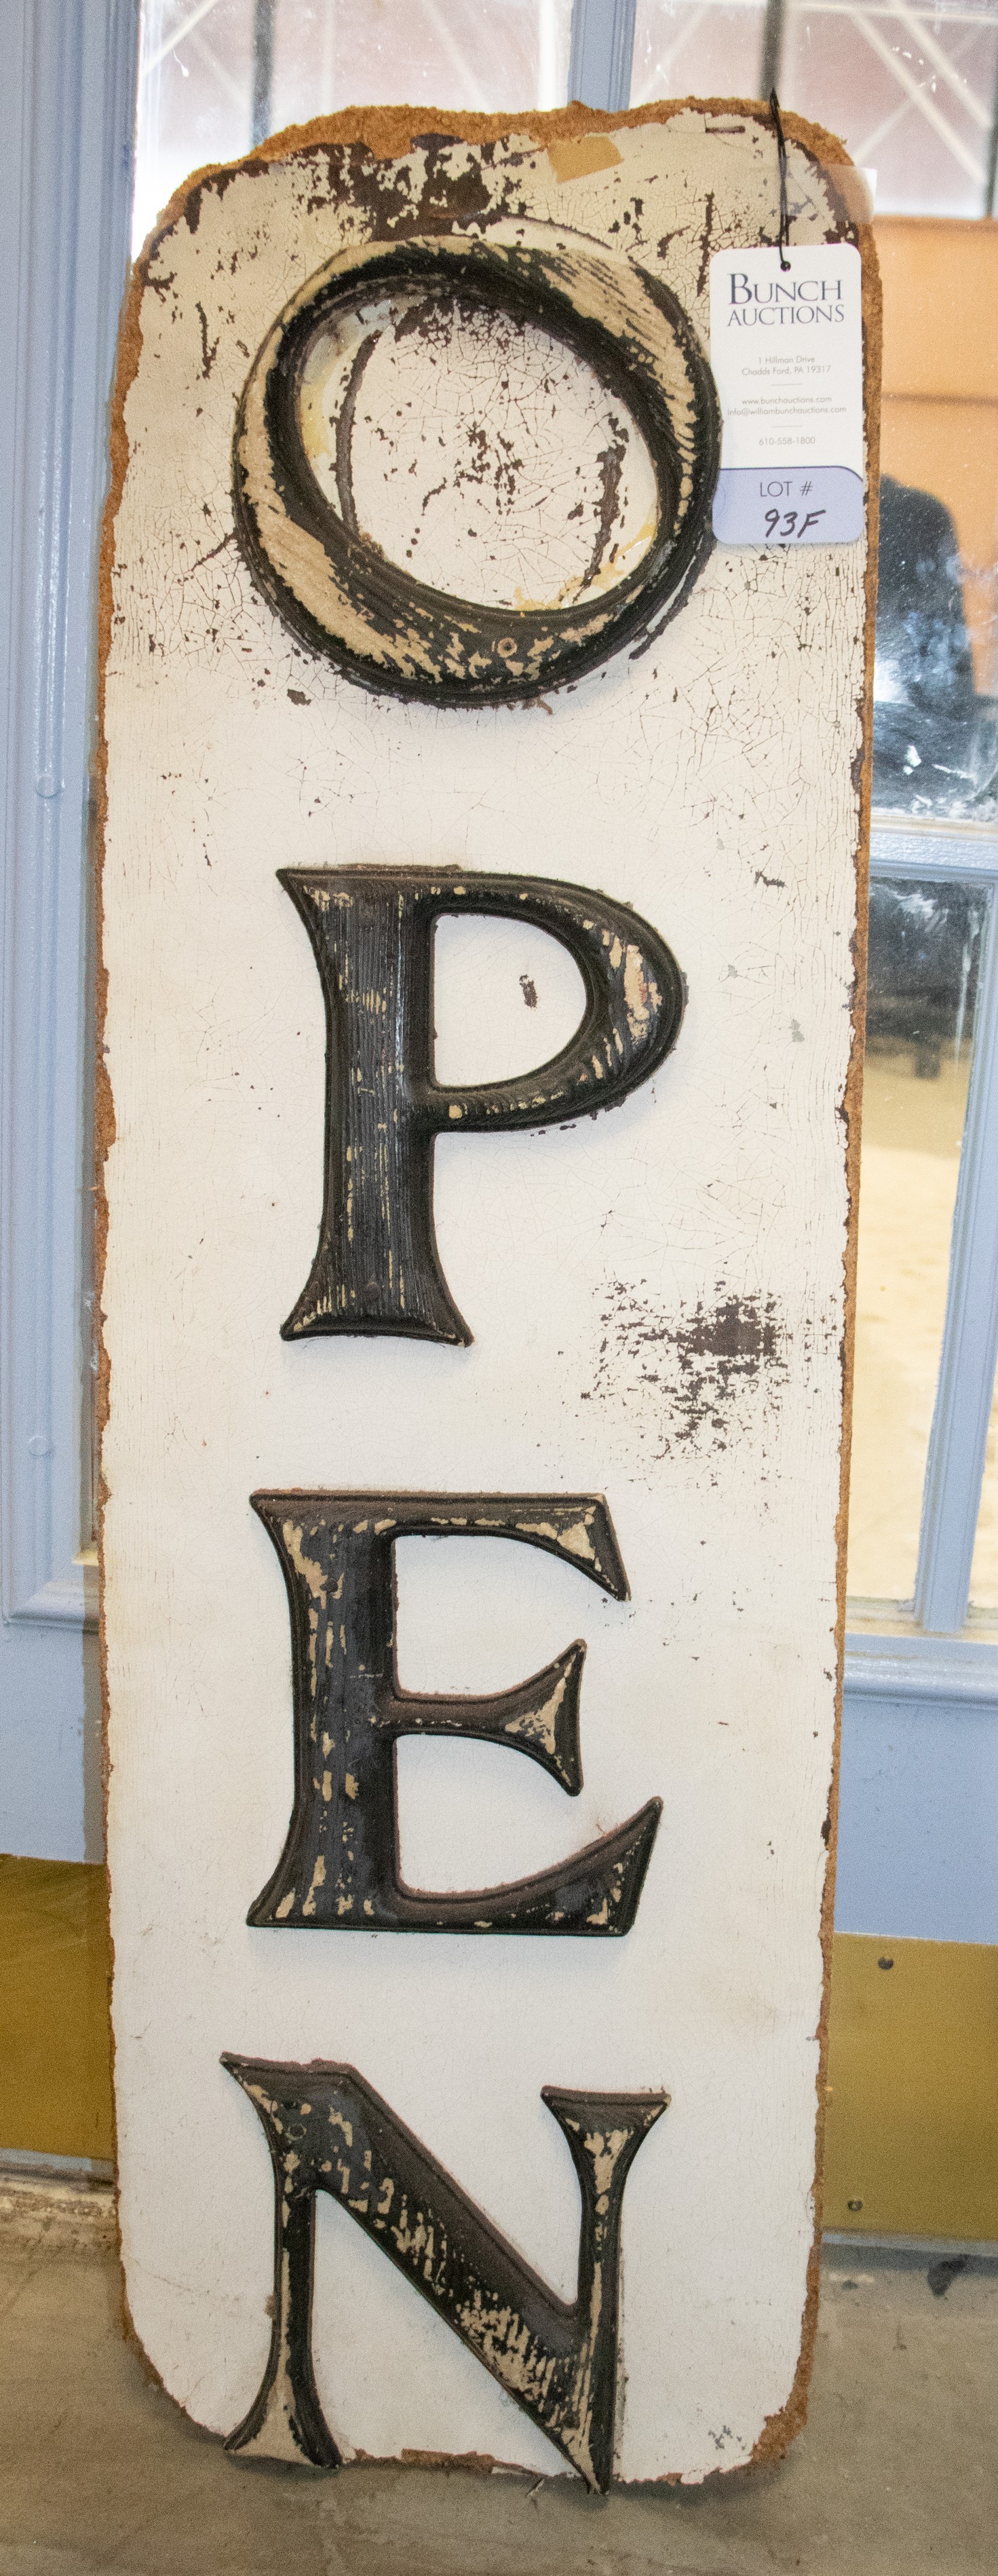 Rustic "Open" sign, painted pressed